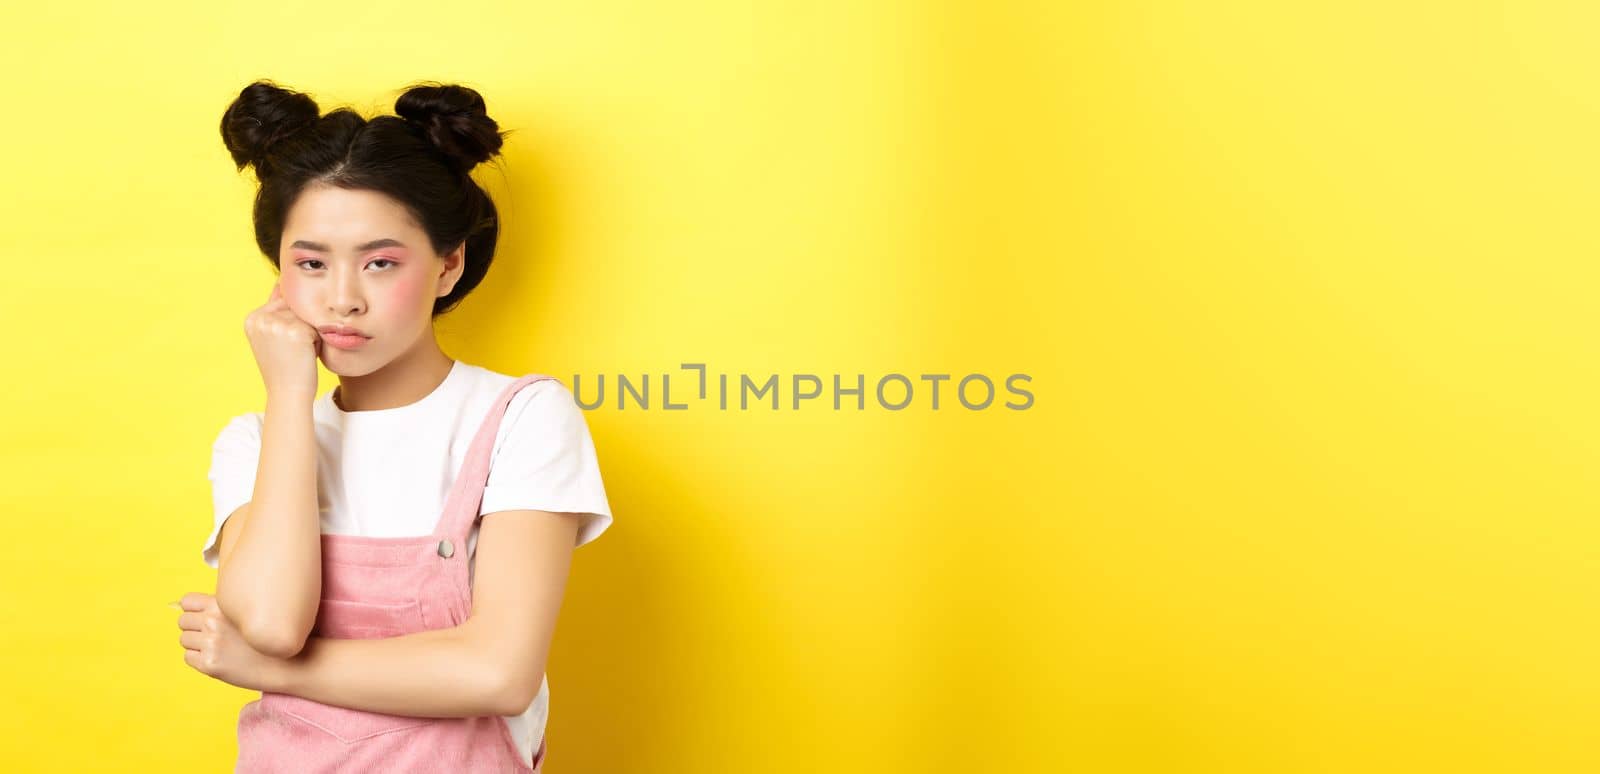 Bored asian teen girl with stylish makeup and summer clothes, looking reluctant and indifferent, standing on yellow background.